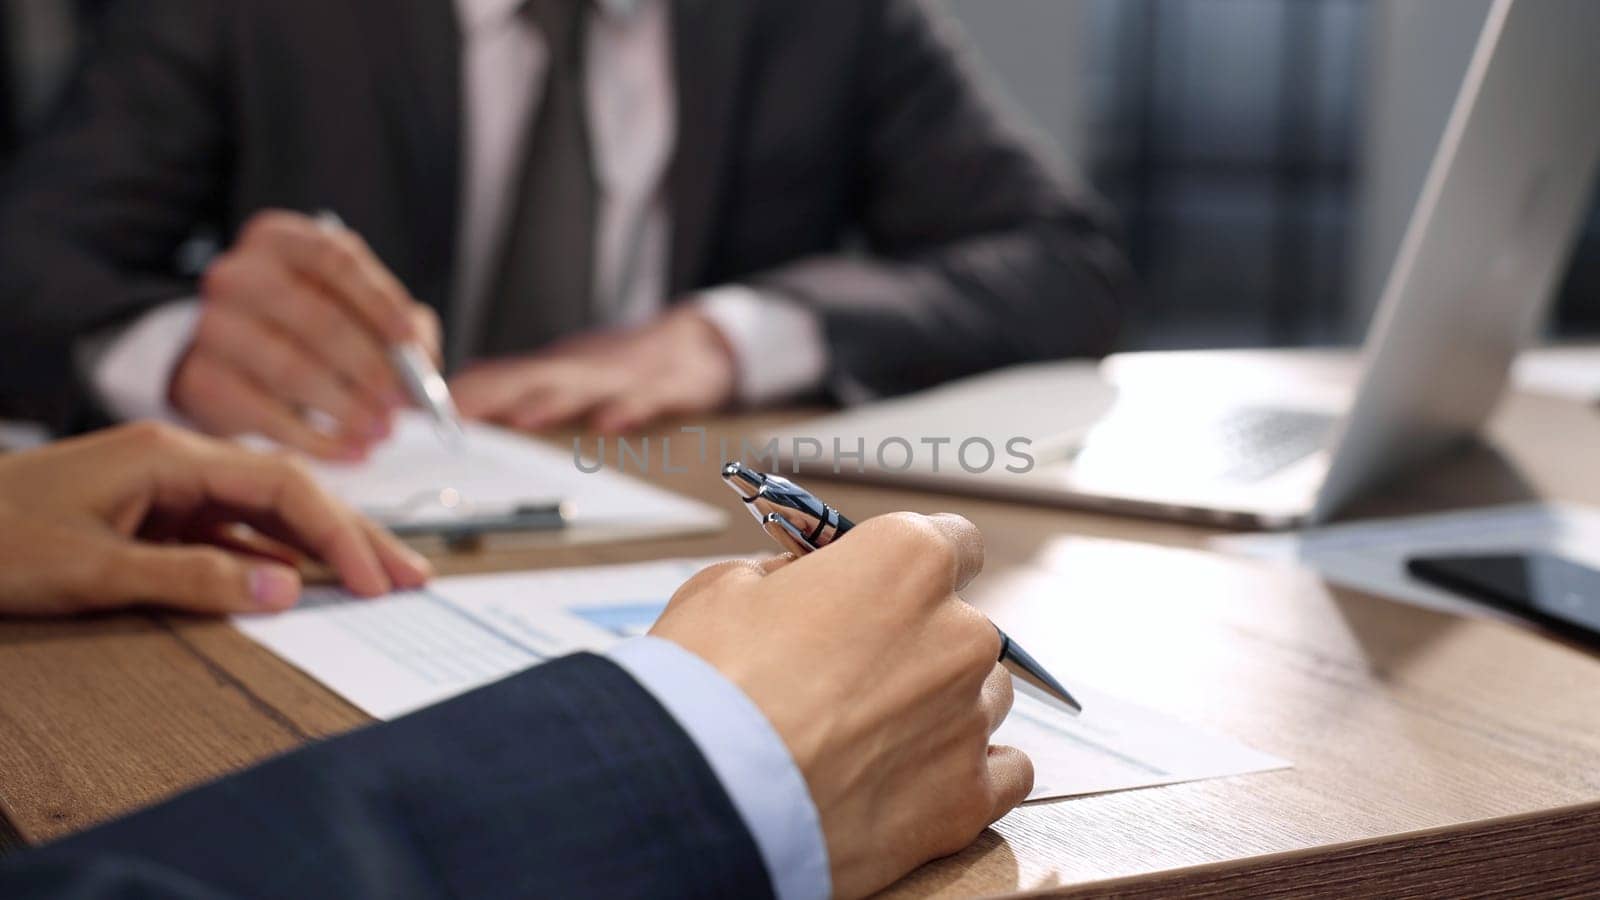 Business proposal, a meeting, discussion of documents.